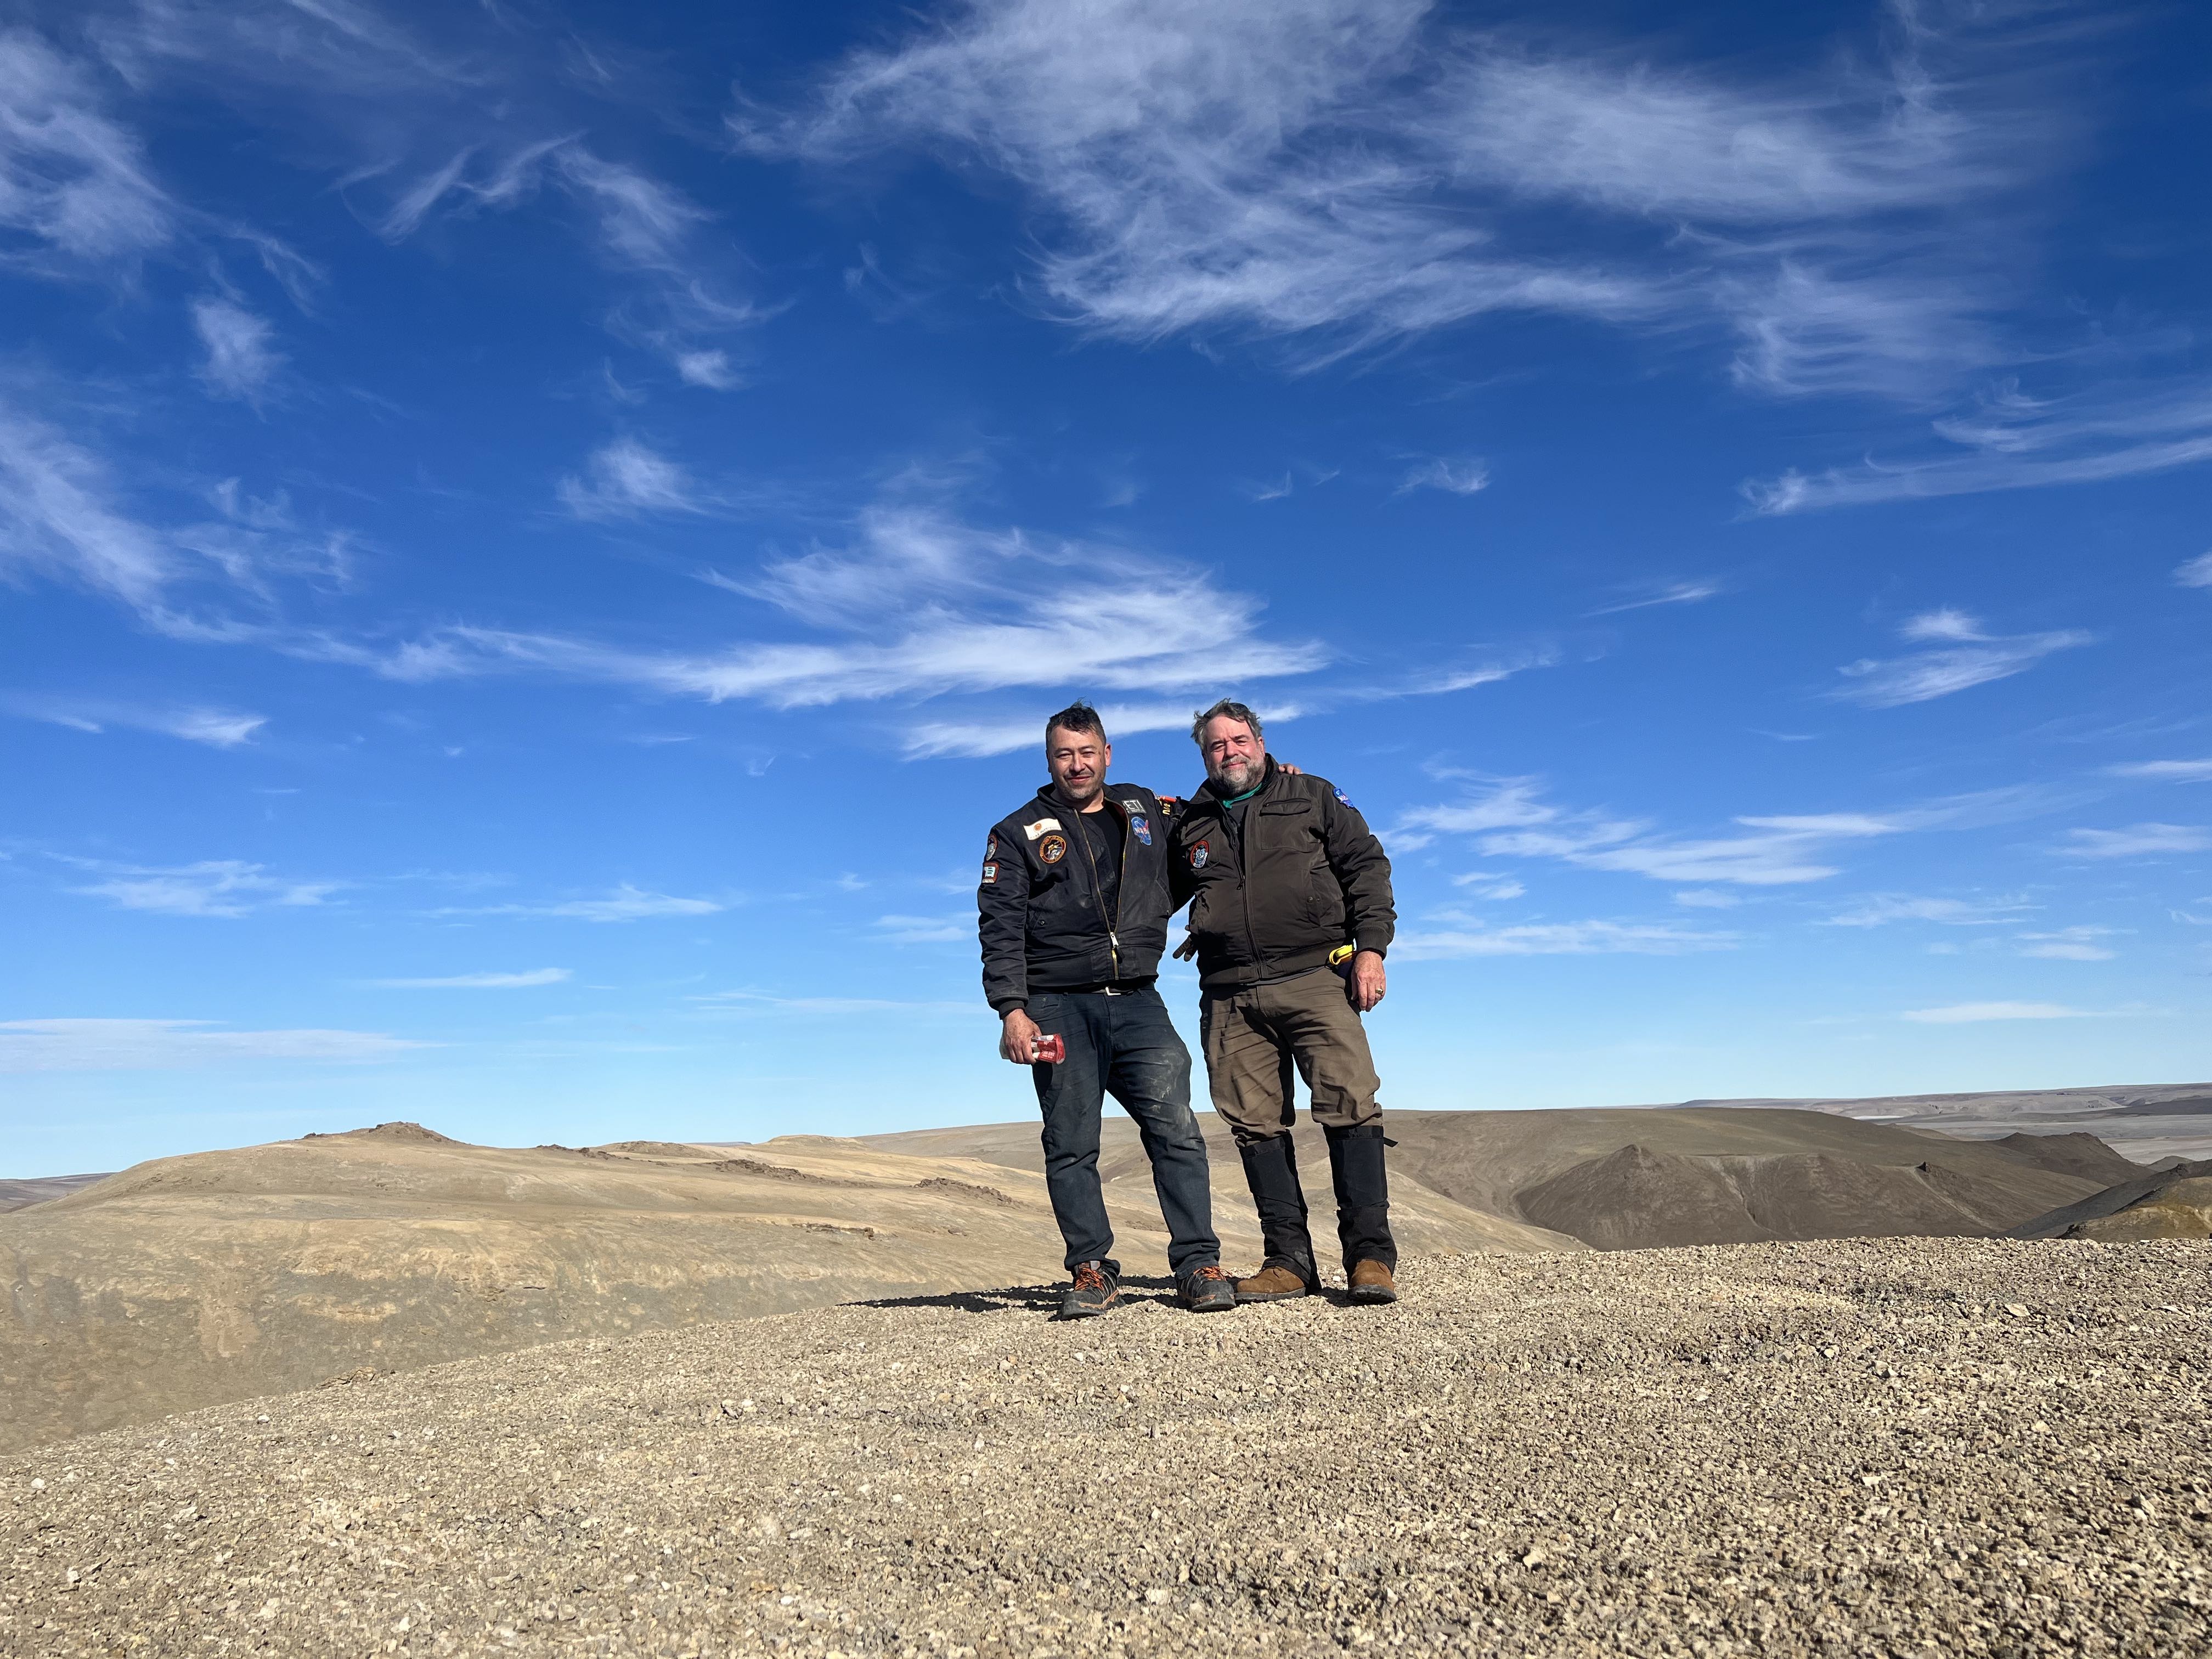 Rod Pyle, right, and Pascal Lee, on an overlook.